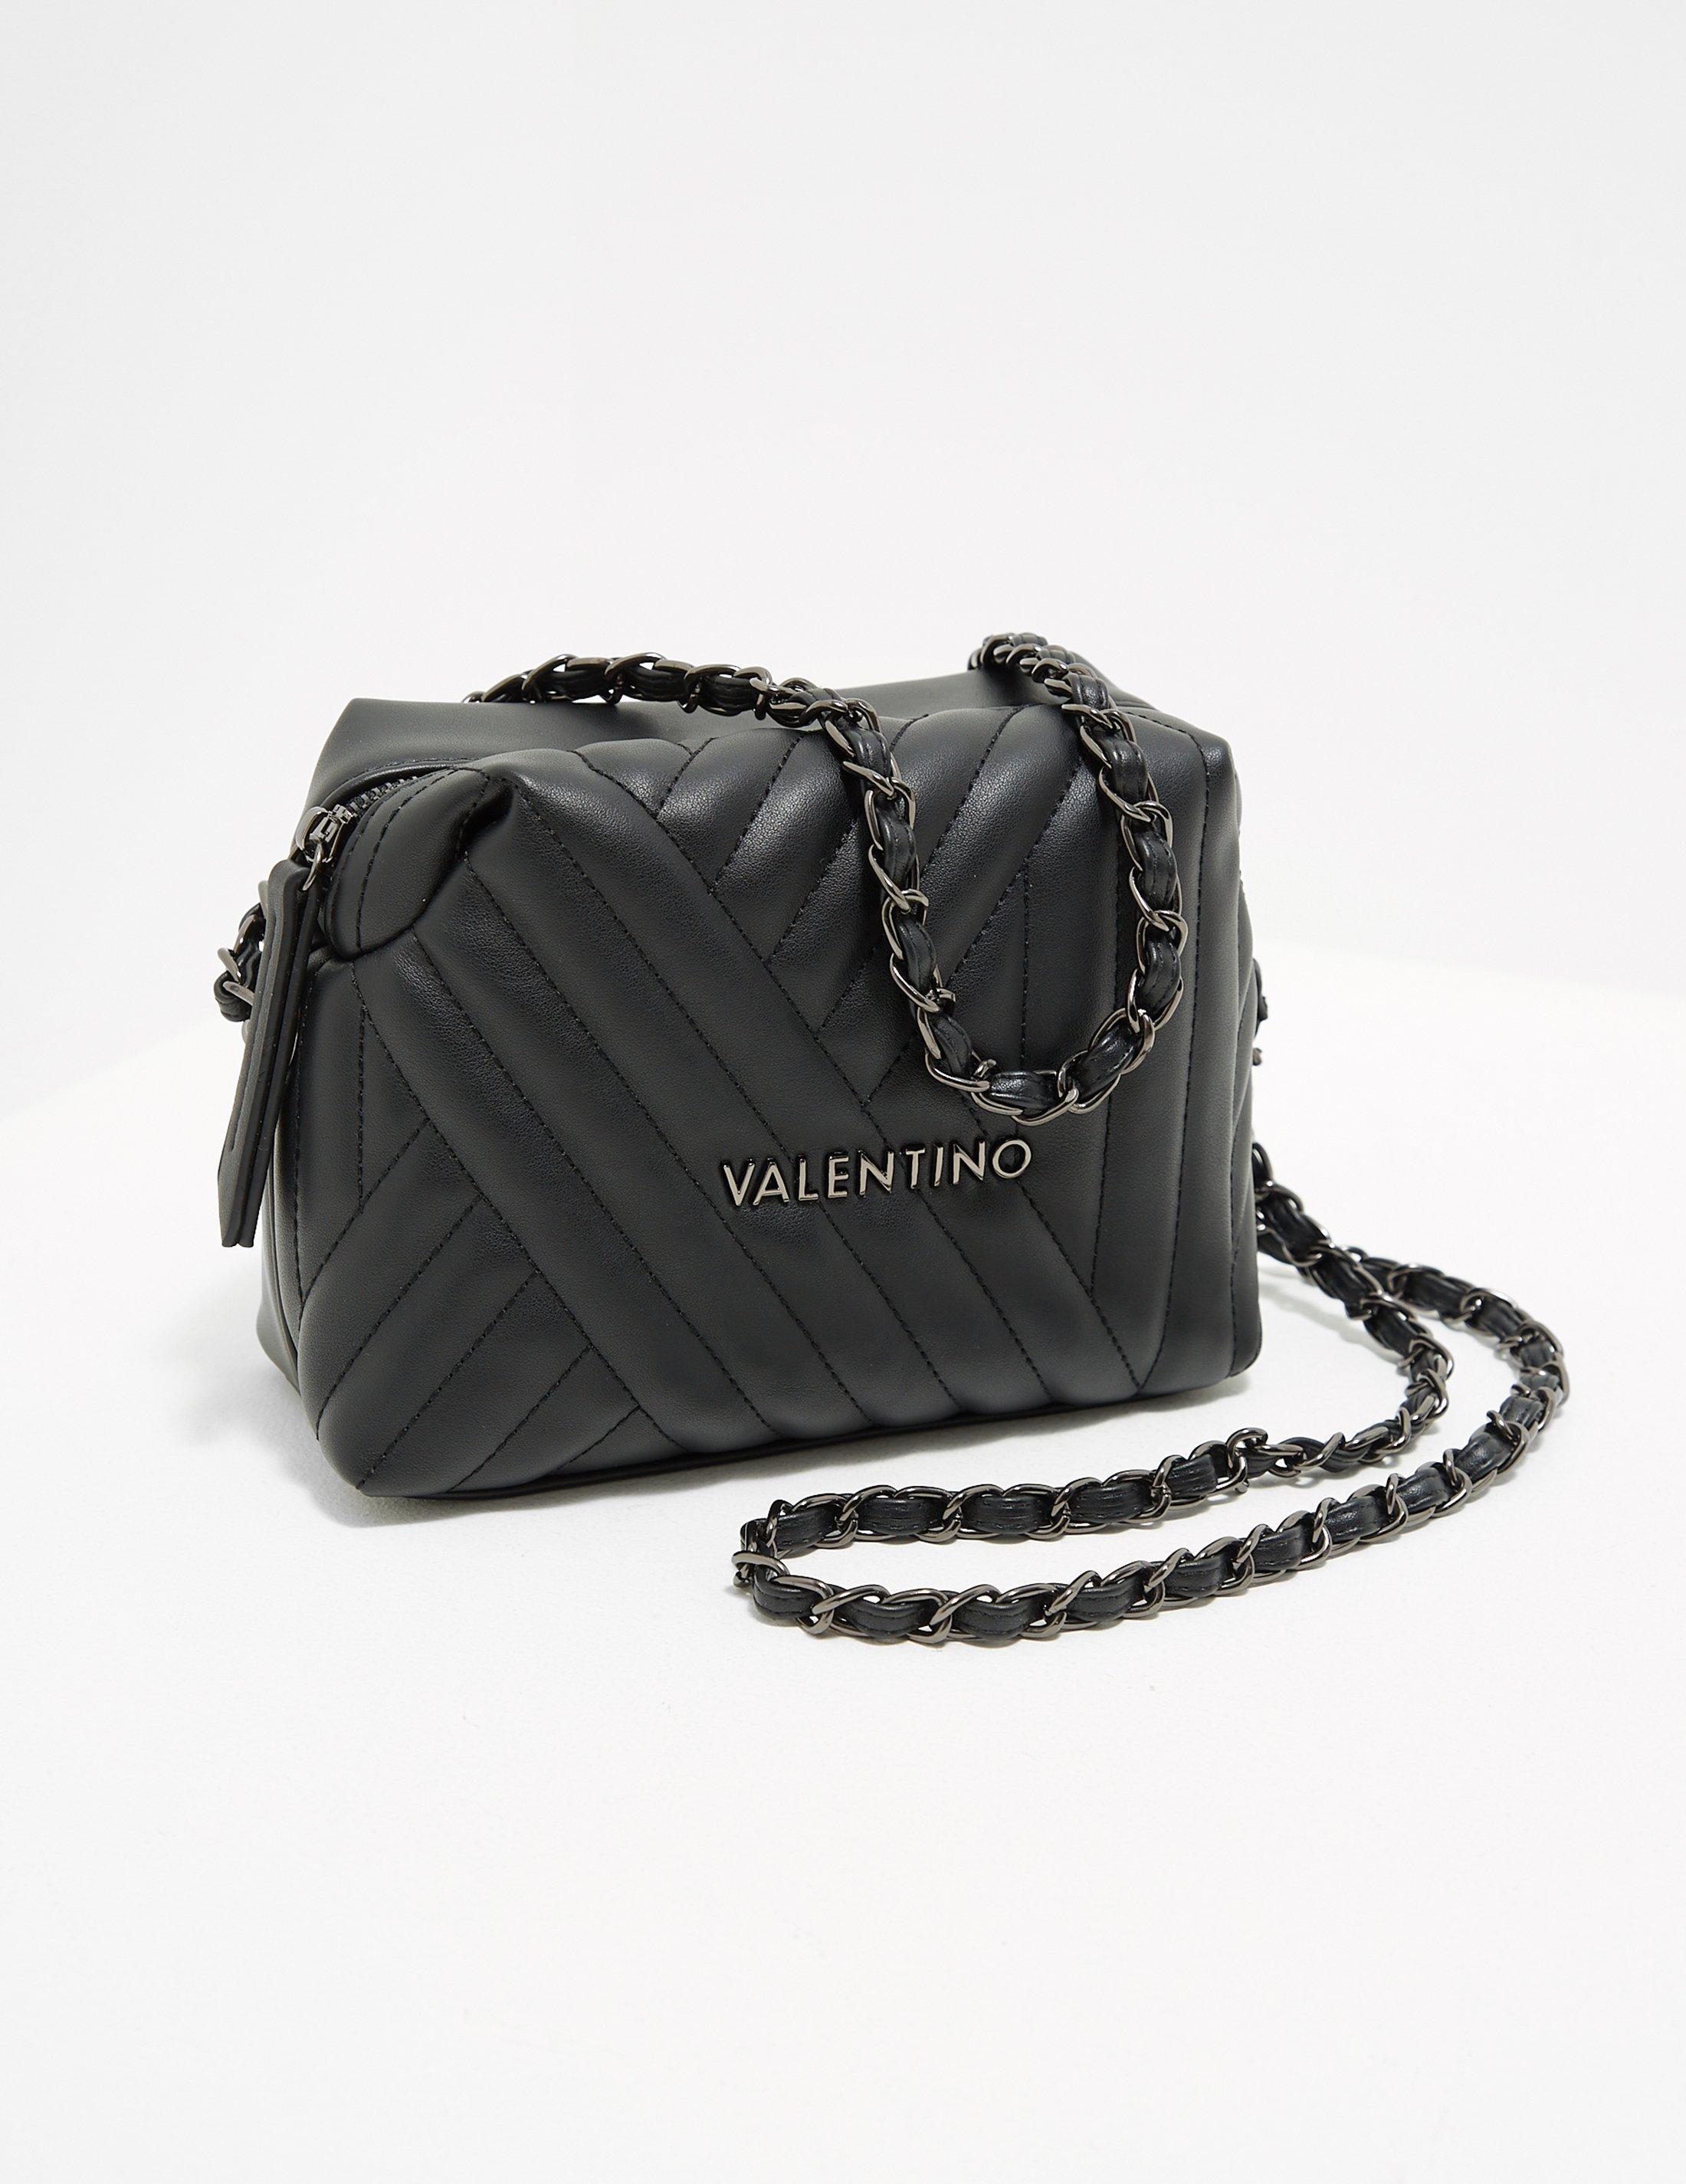 Valentino By Mario Valentino Signature Quilted Box Bag Black - Lyst